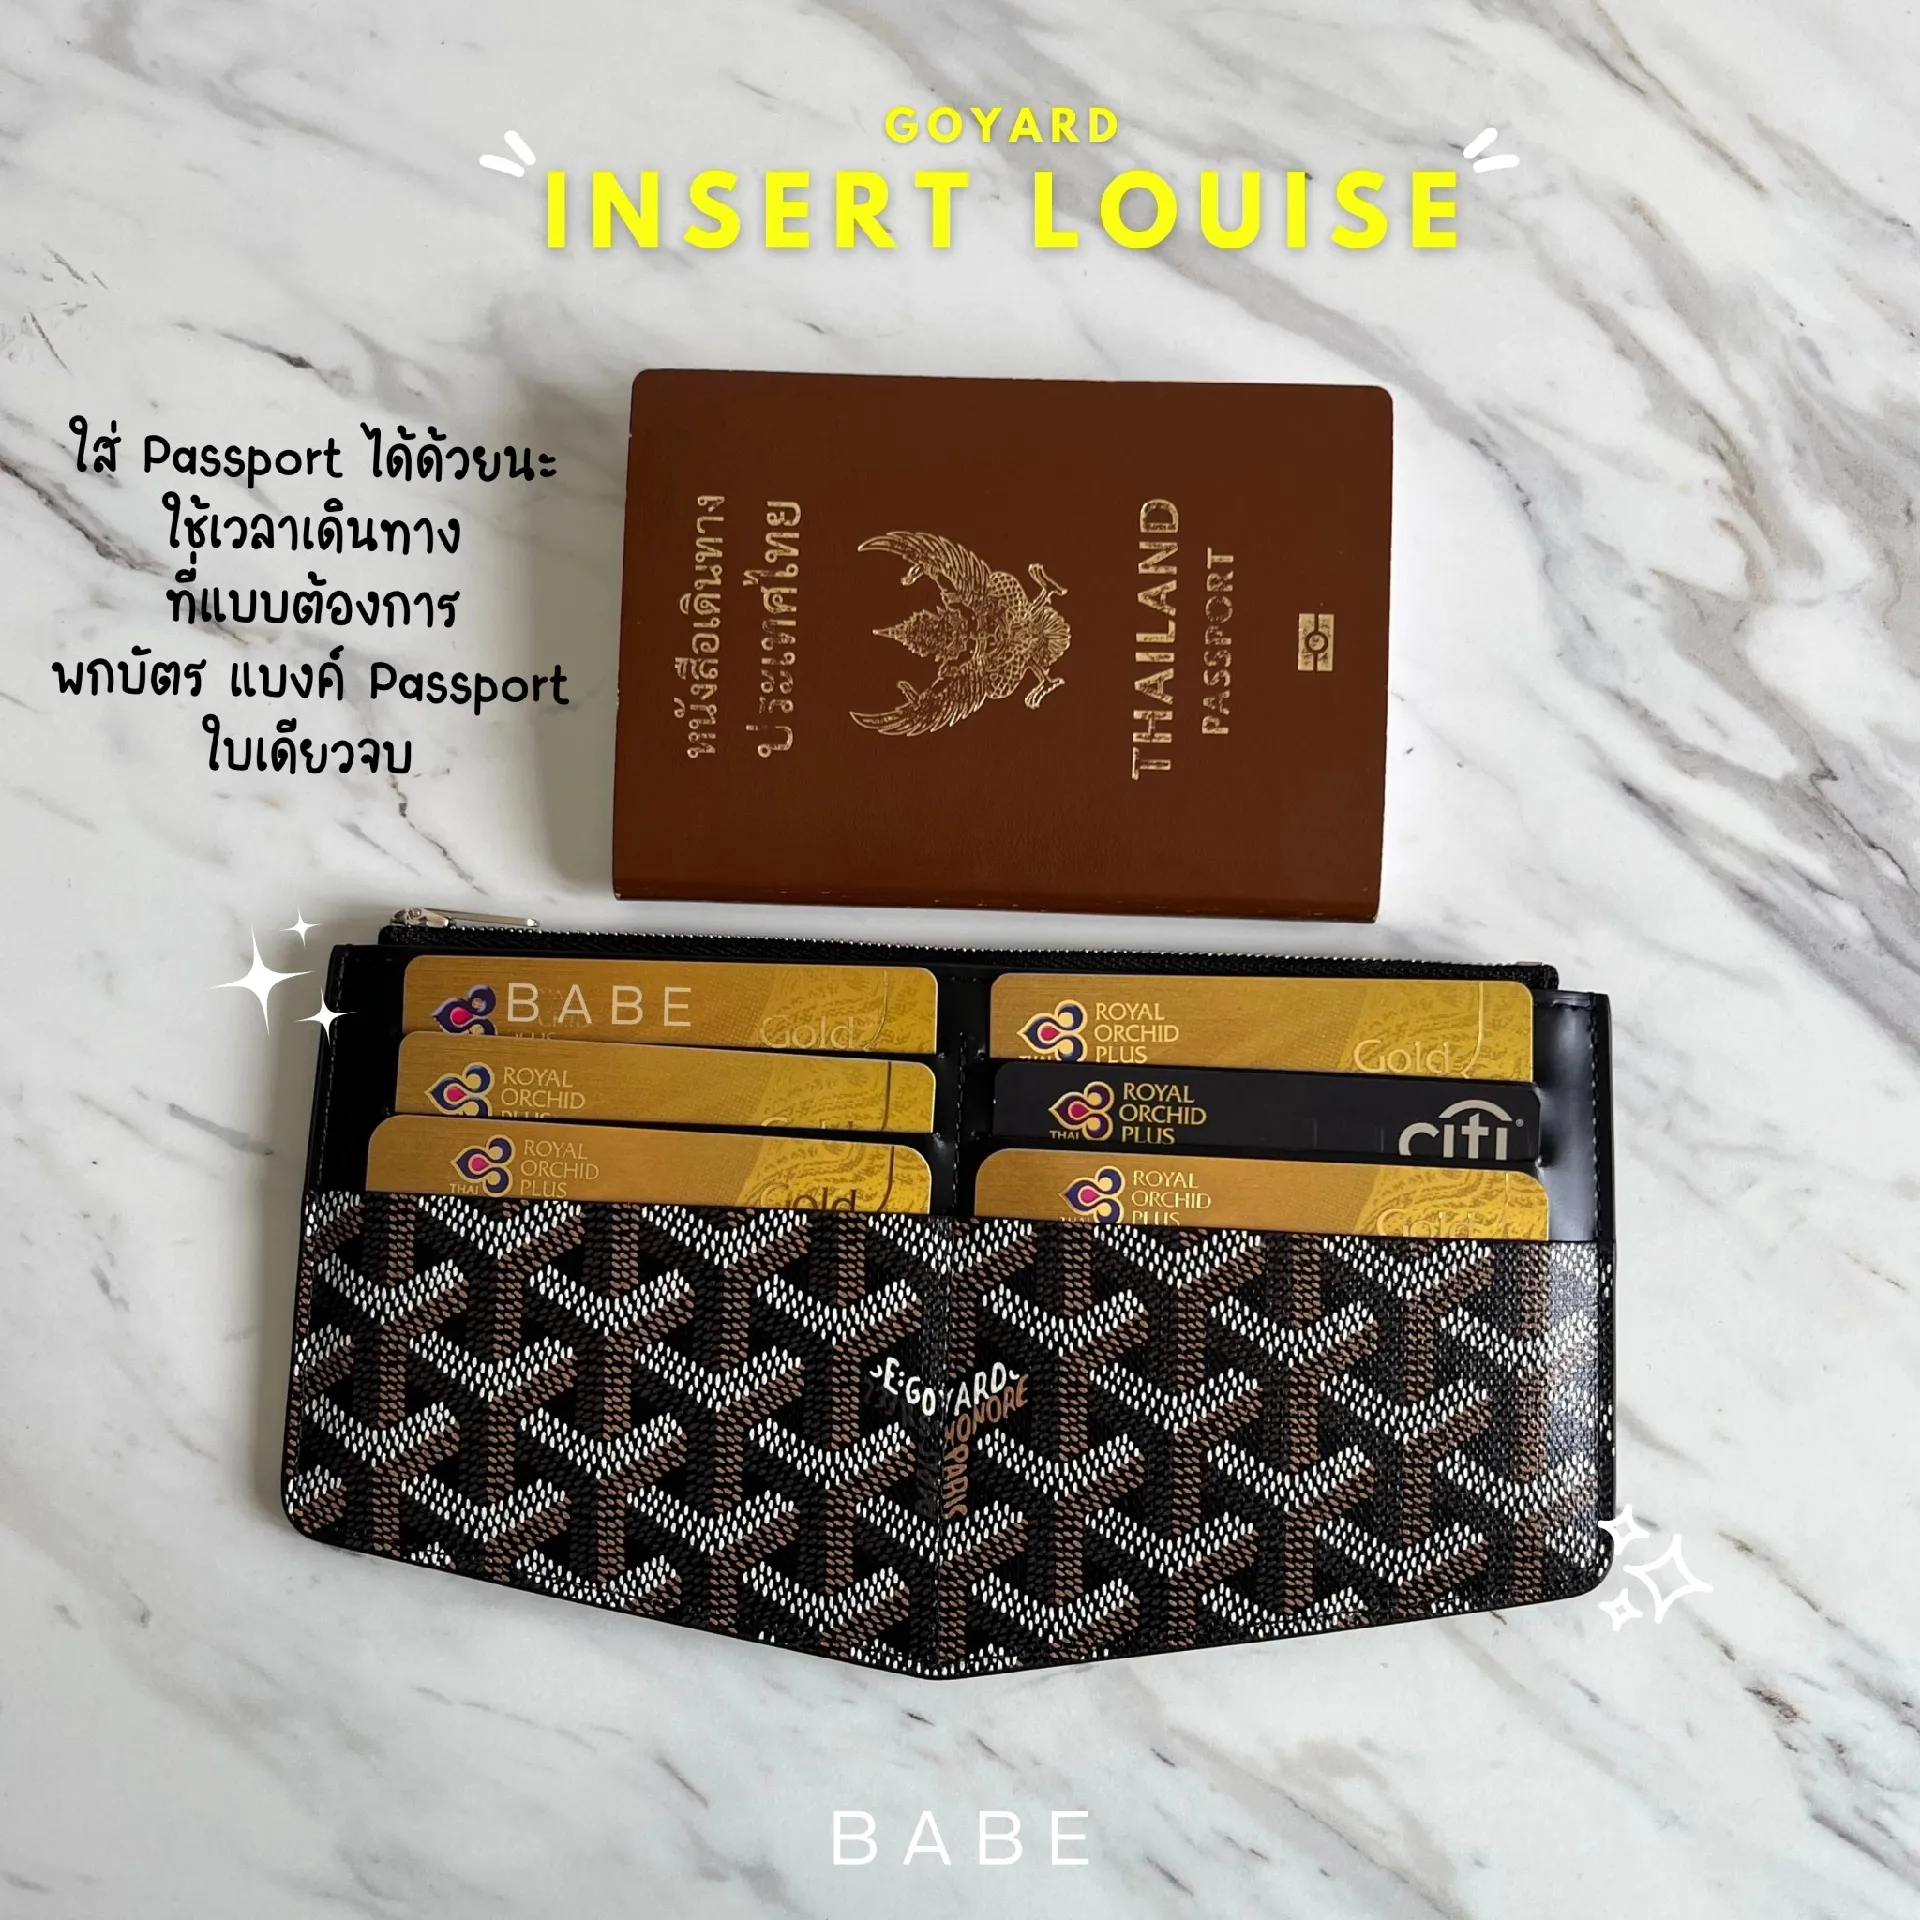 Maison Goyard - YOUR HOME AWAY FROM HOME With the Insert Louise, your  essentials will follow, wherever you go. #goyard #sogoyard #timelessstyle  #timelesscraftsmanship #insertlouisebygoyard